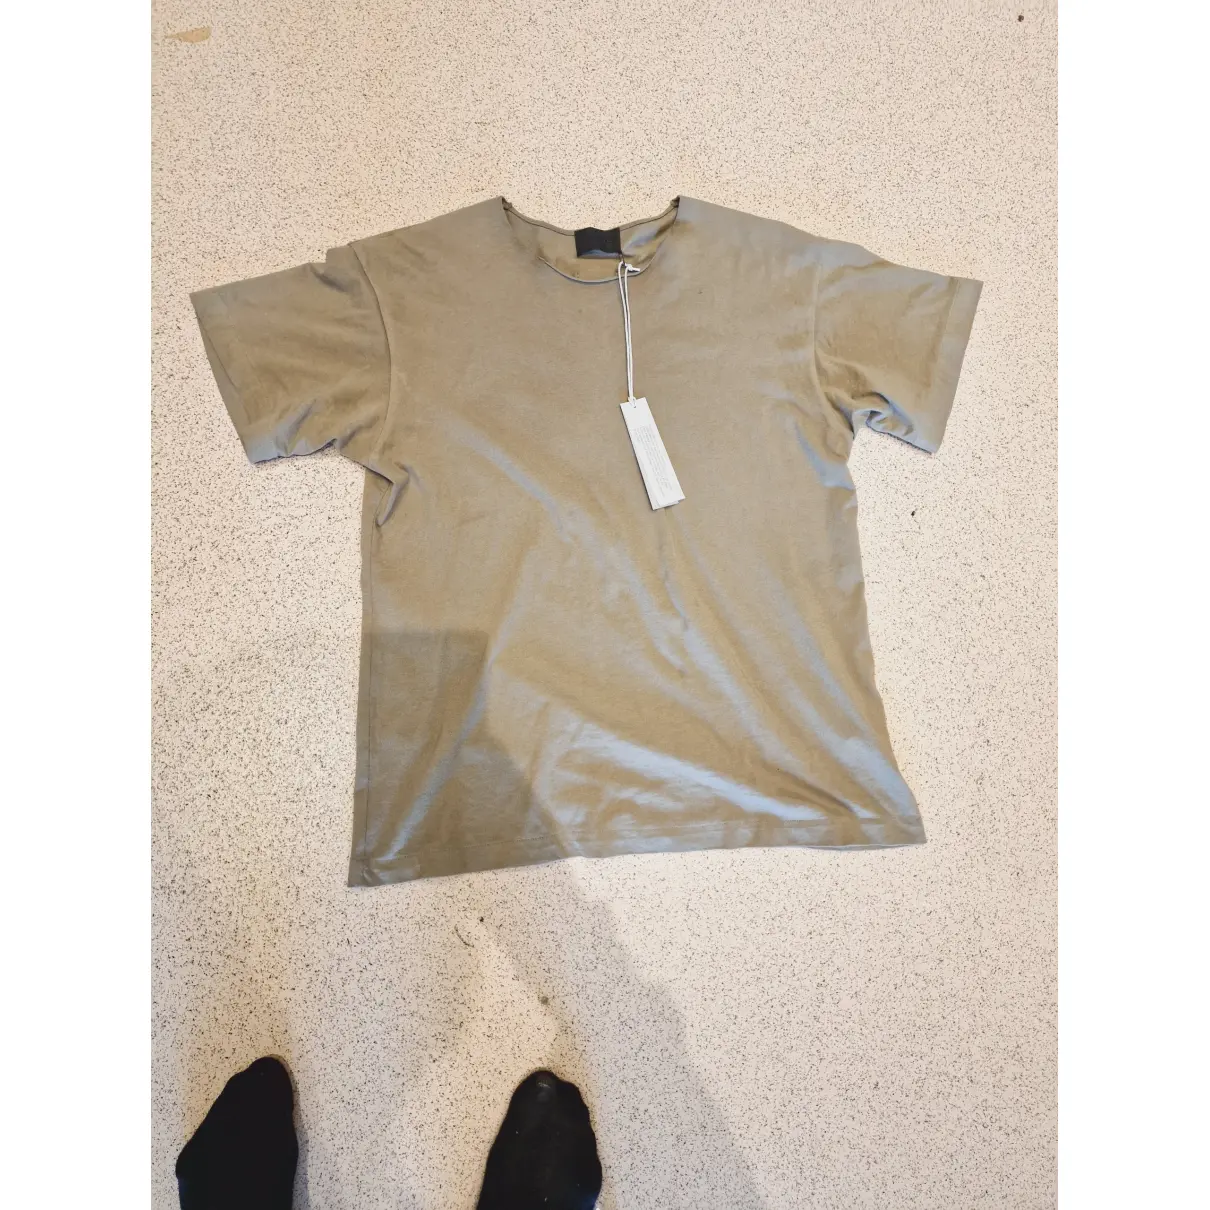 Buy Fear of God SeventhCollection t-shirt online